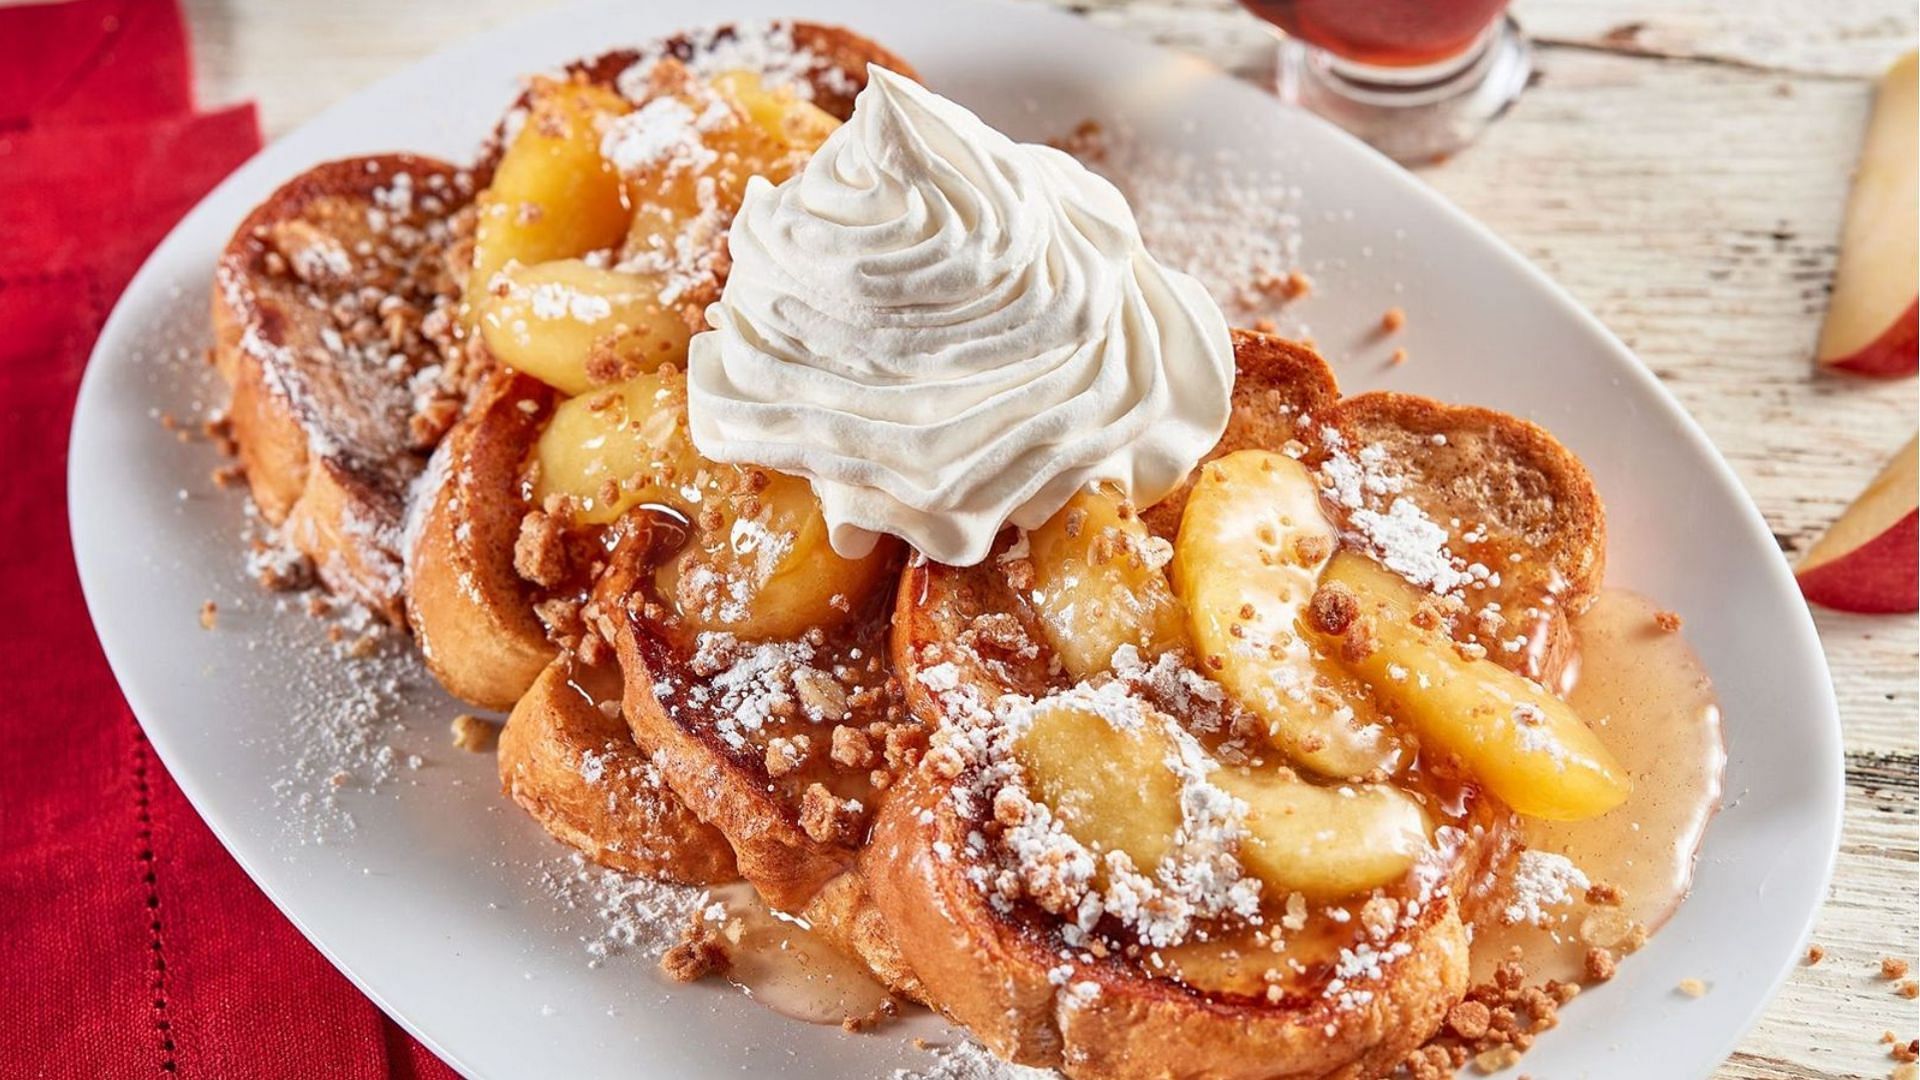 Huddle House&#039;s Apple Streusel Topped French Toast is coming back on the menu (Imaage via Huddle House)